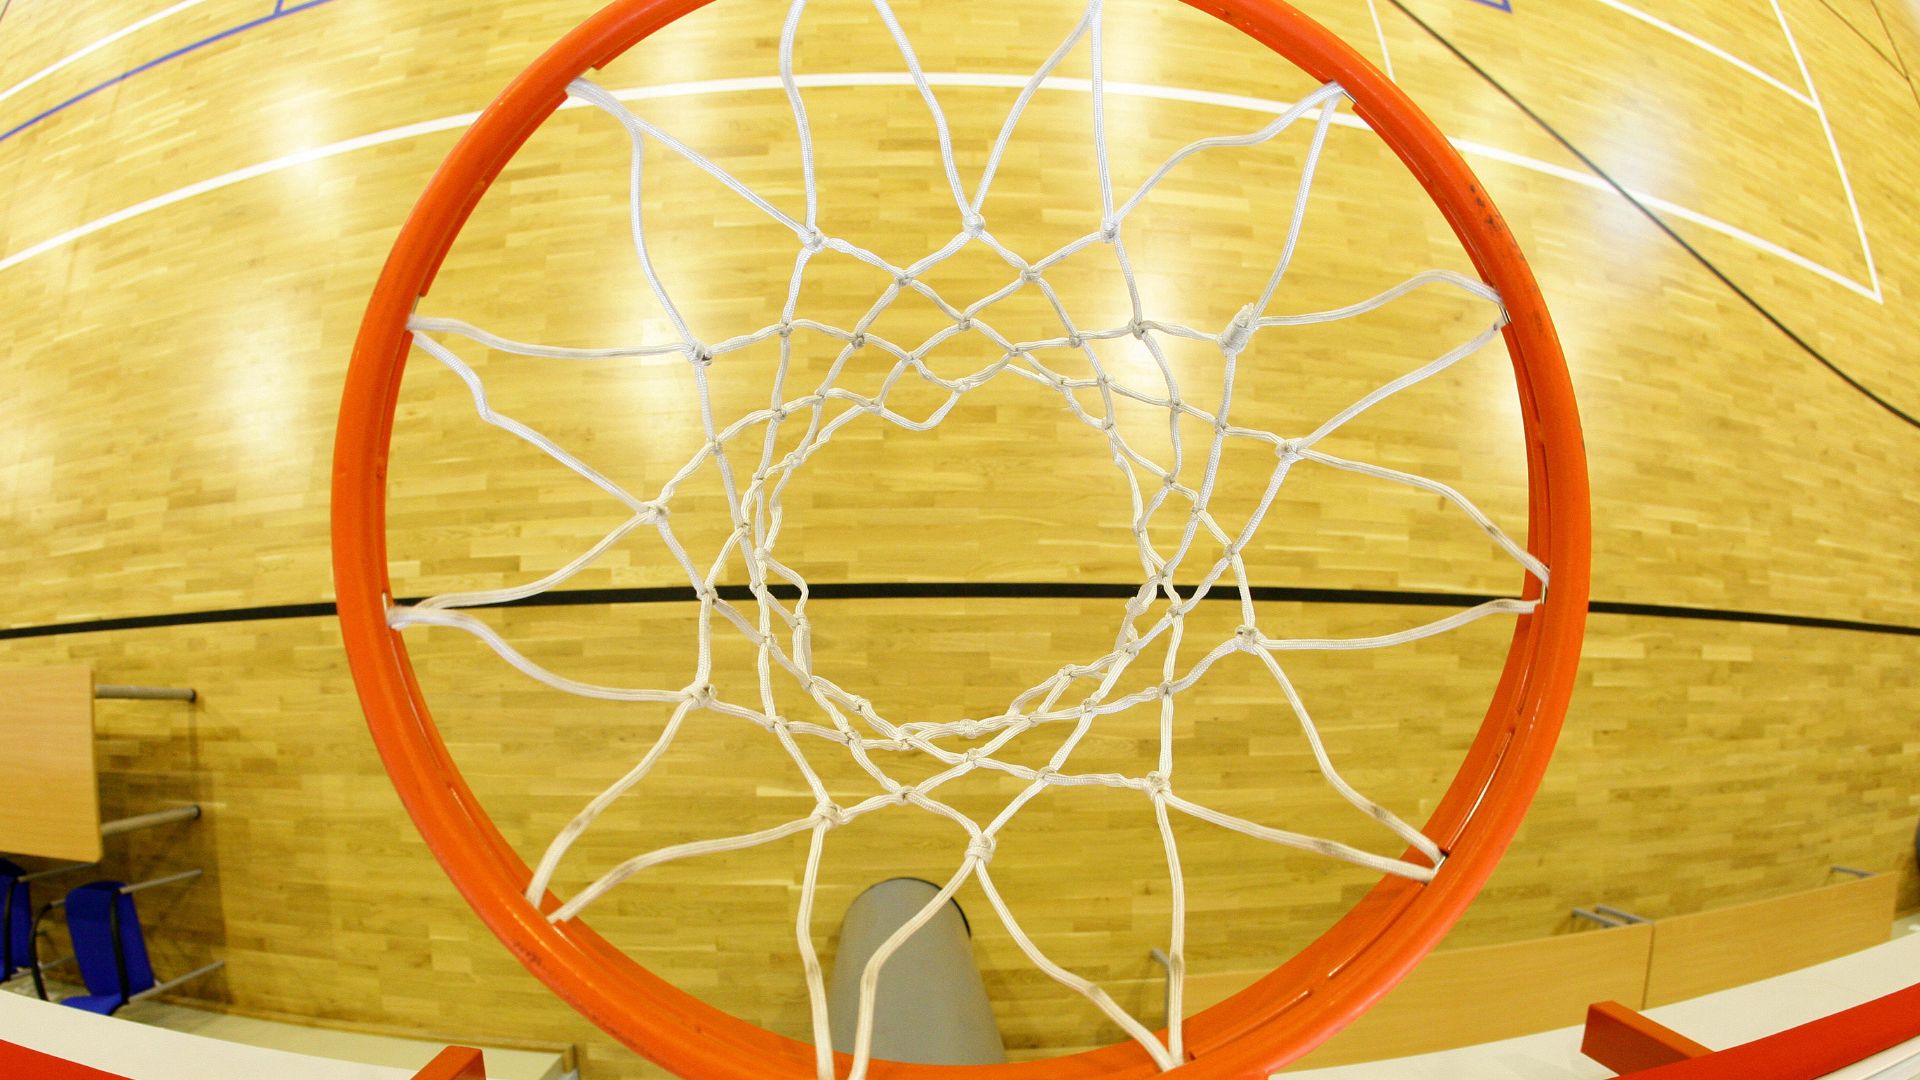 Cover photo of a yellow Basket Ball court and Hoop